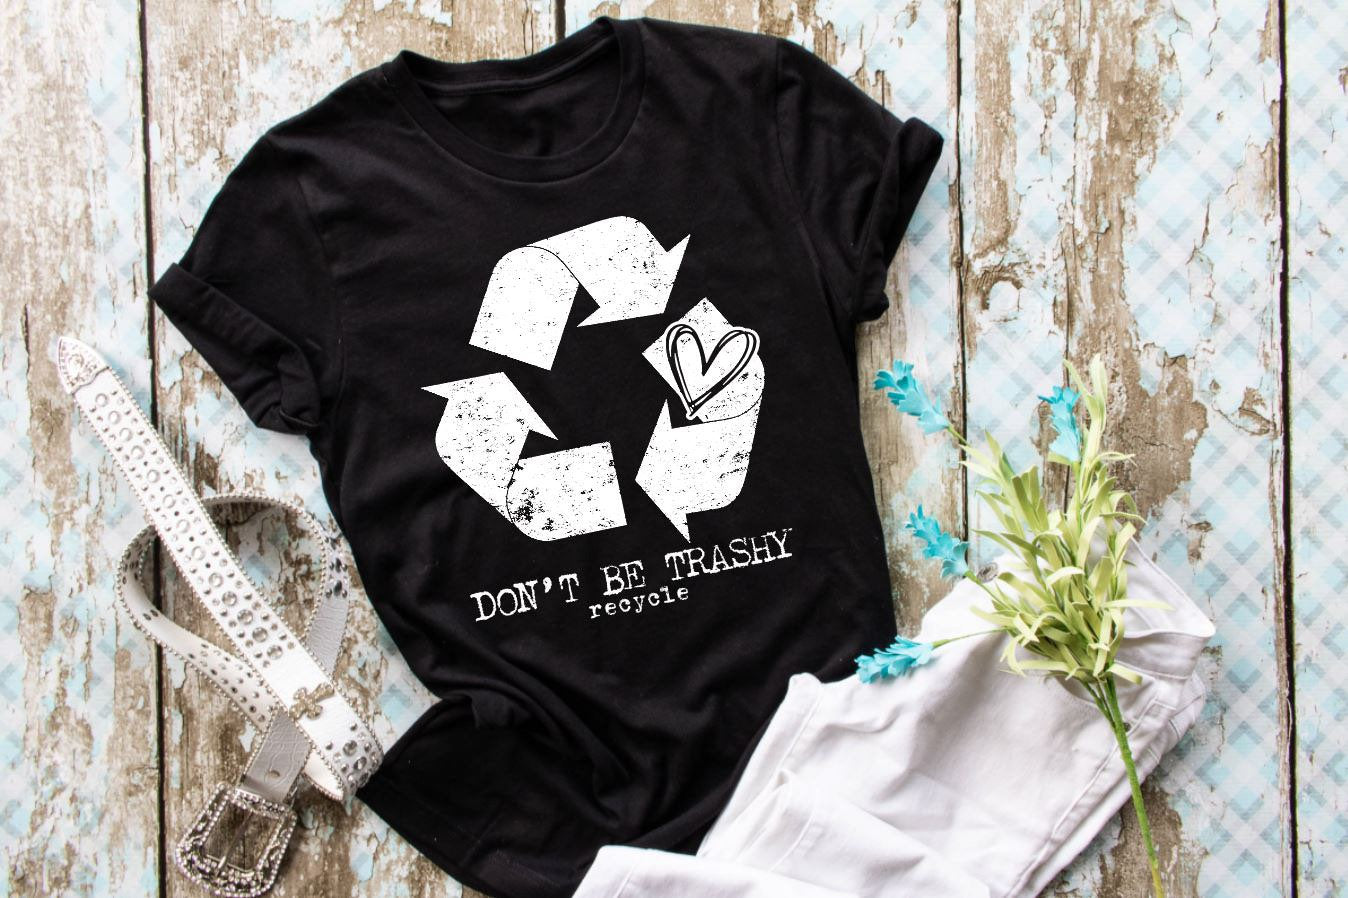 Dont be trashy, recycle shirt, earth day every day, save the earth, green tee, environment shirt, Mother Earth tee, love your earth, recycle